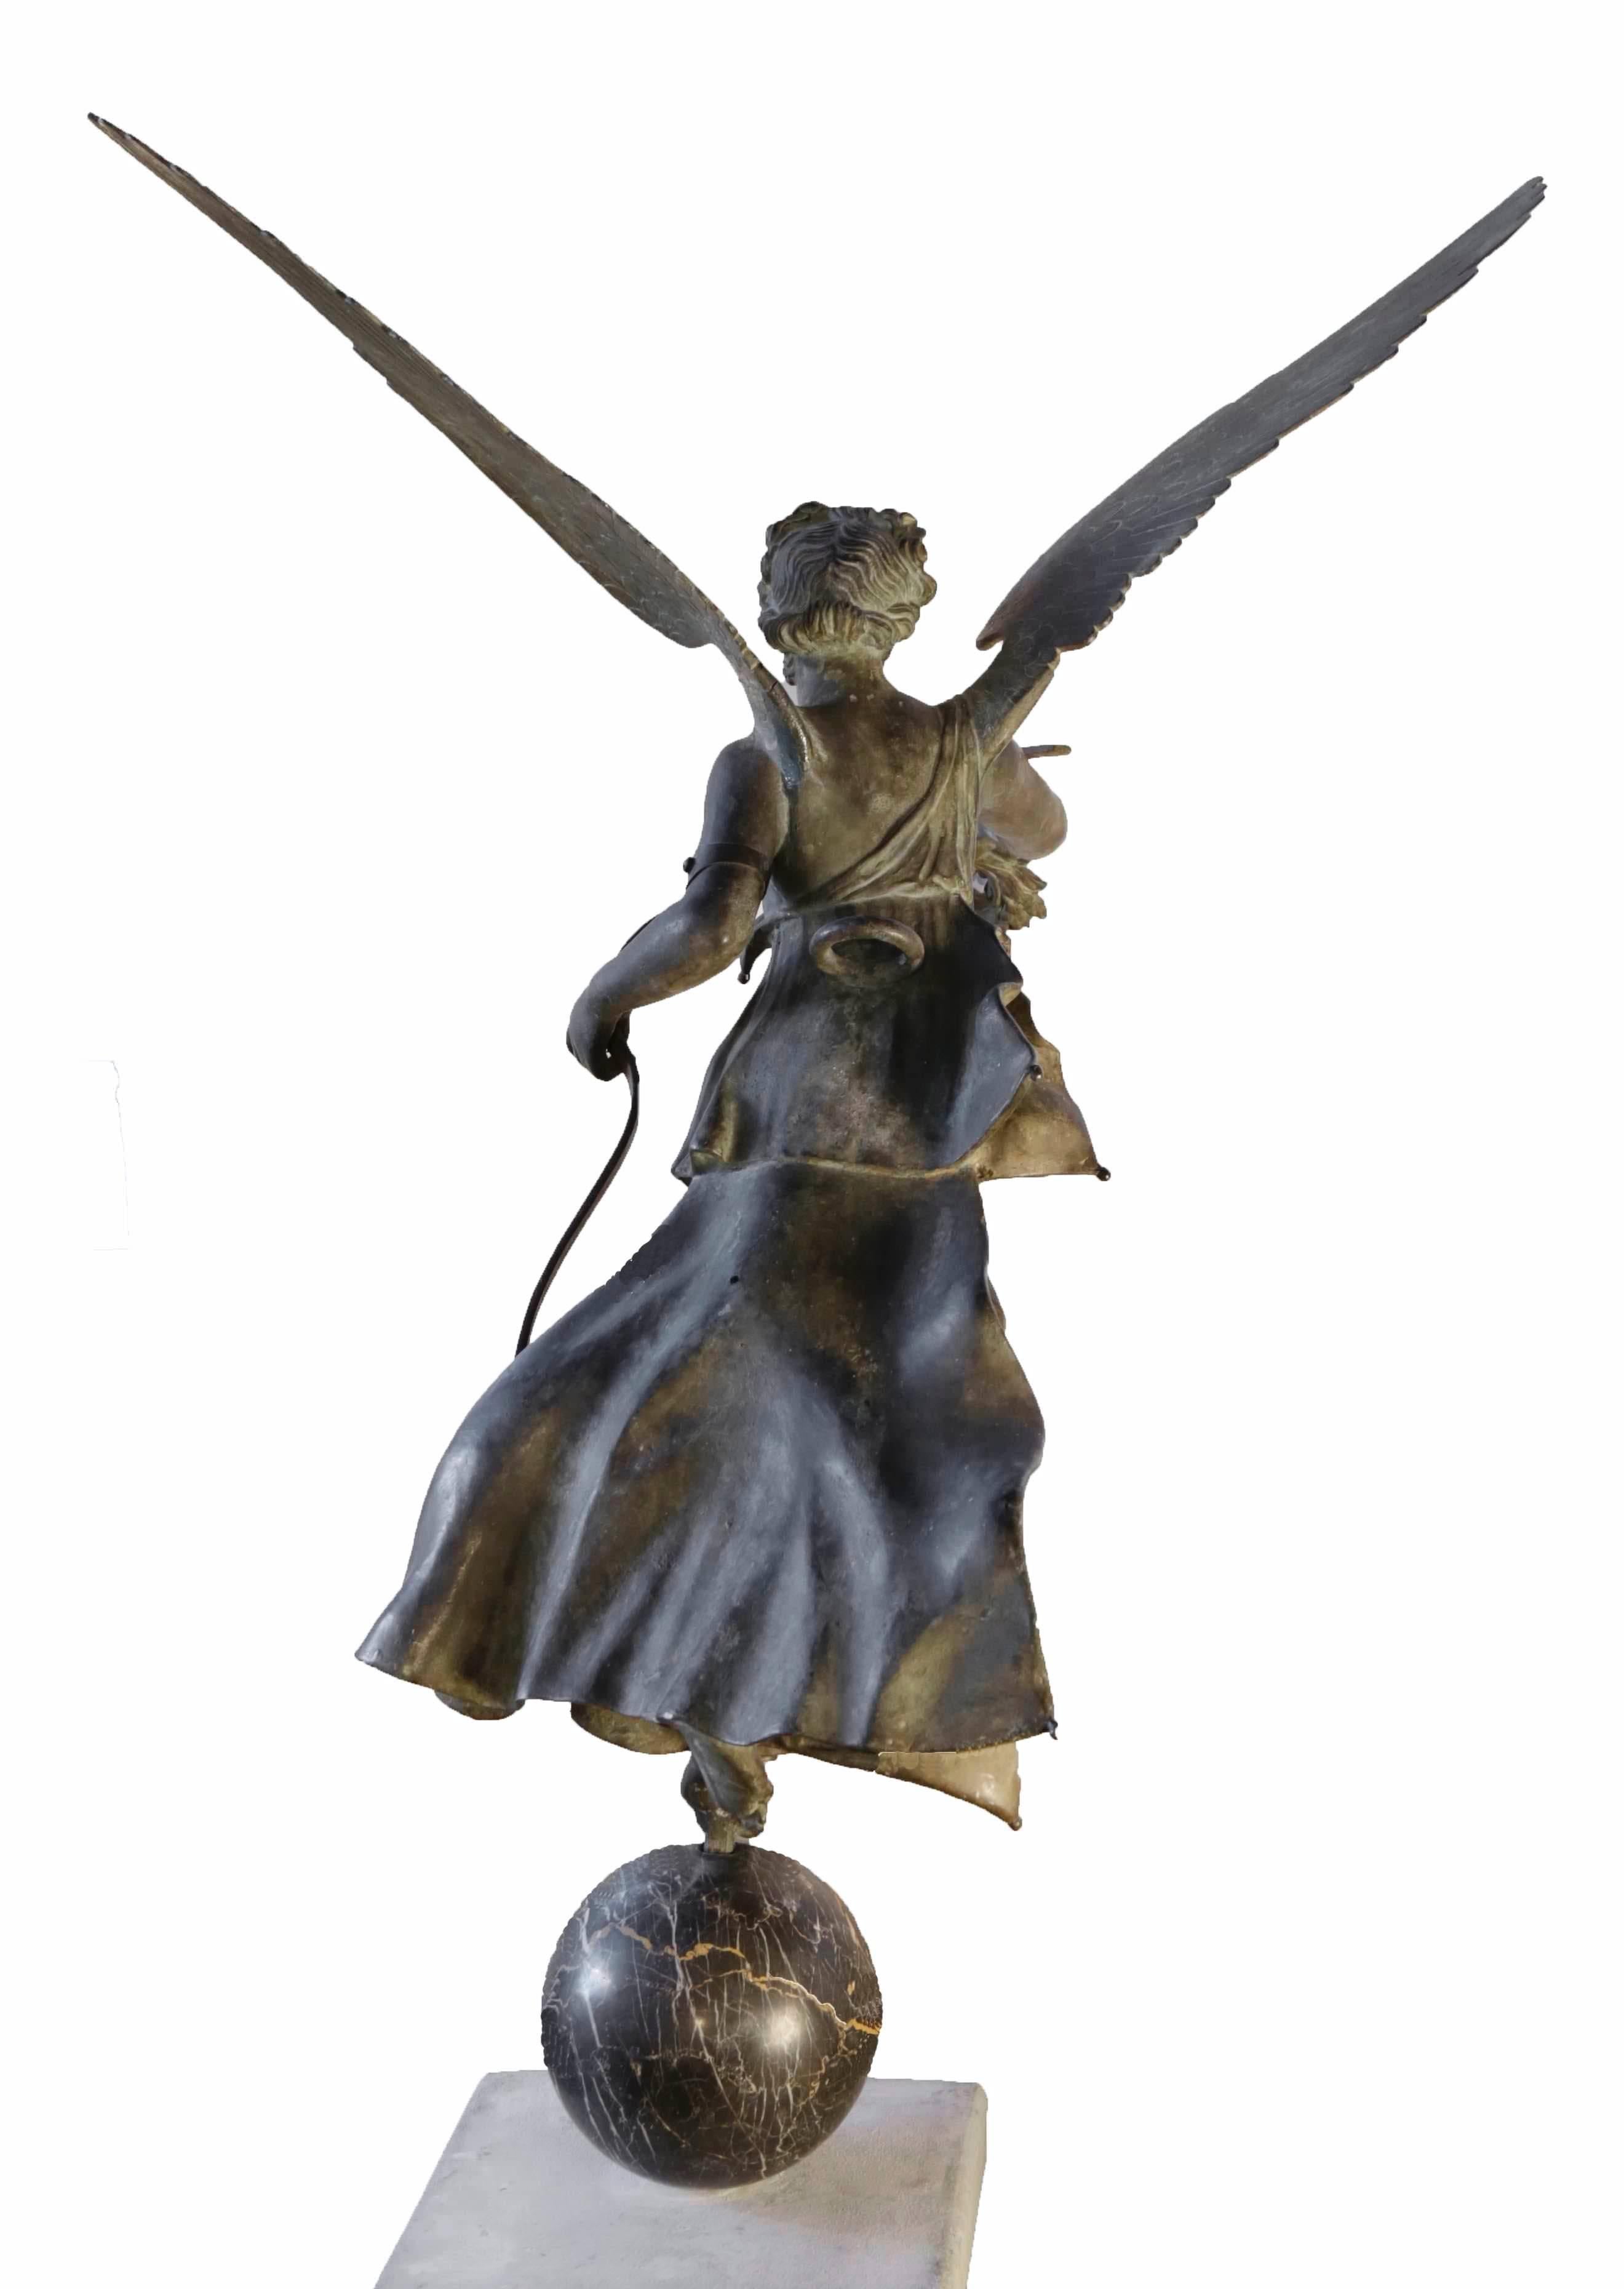 Italian Bronze Figure of Nike, or Winged Victory - Gold Figurative Sculpture by Unknown